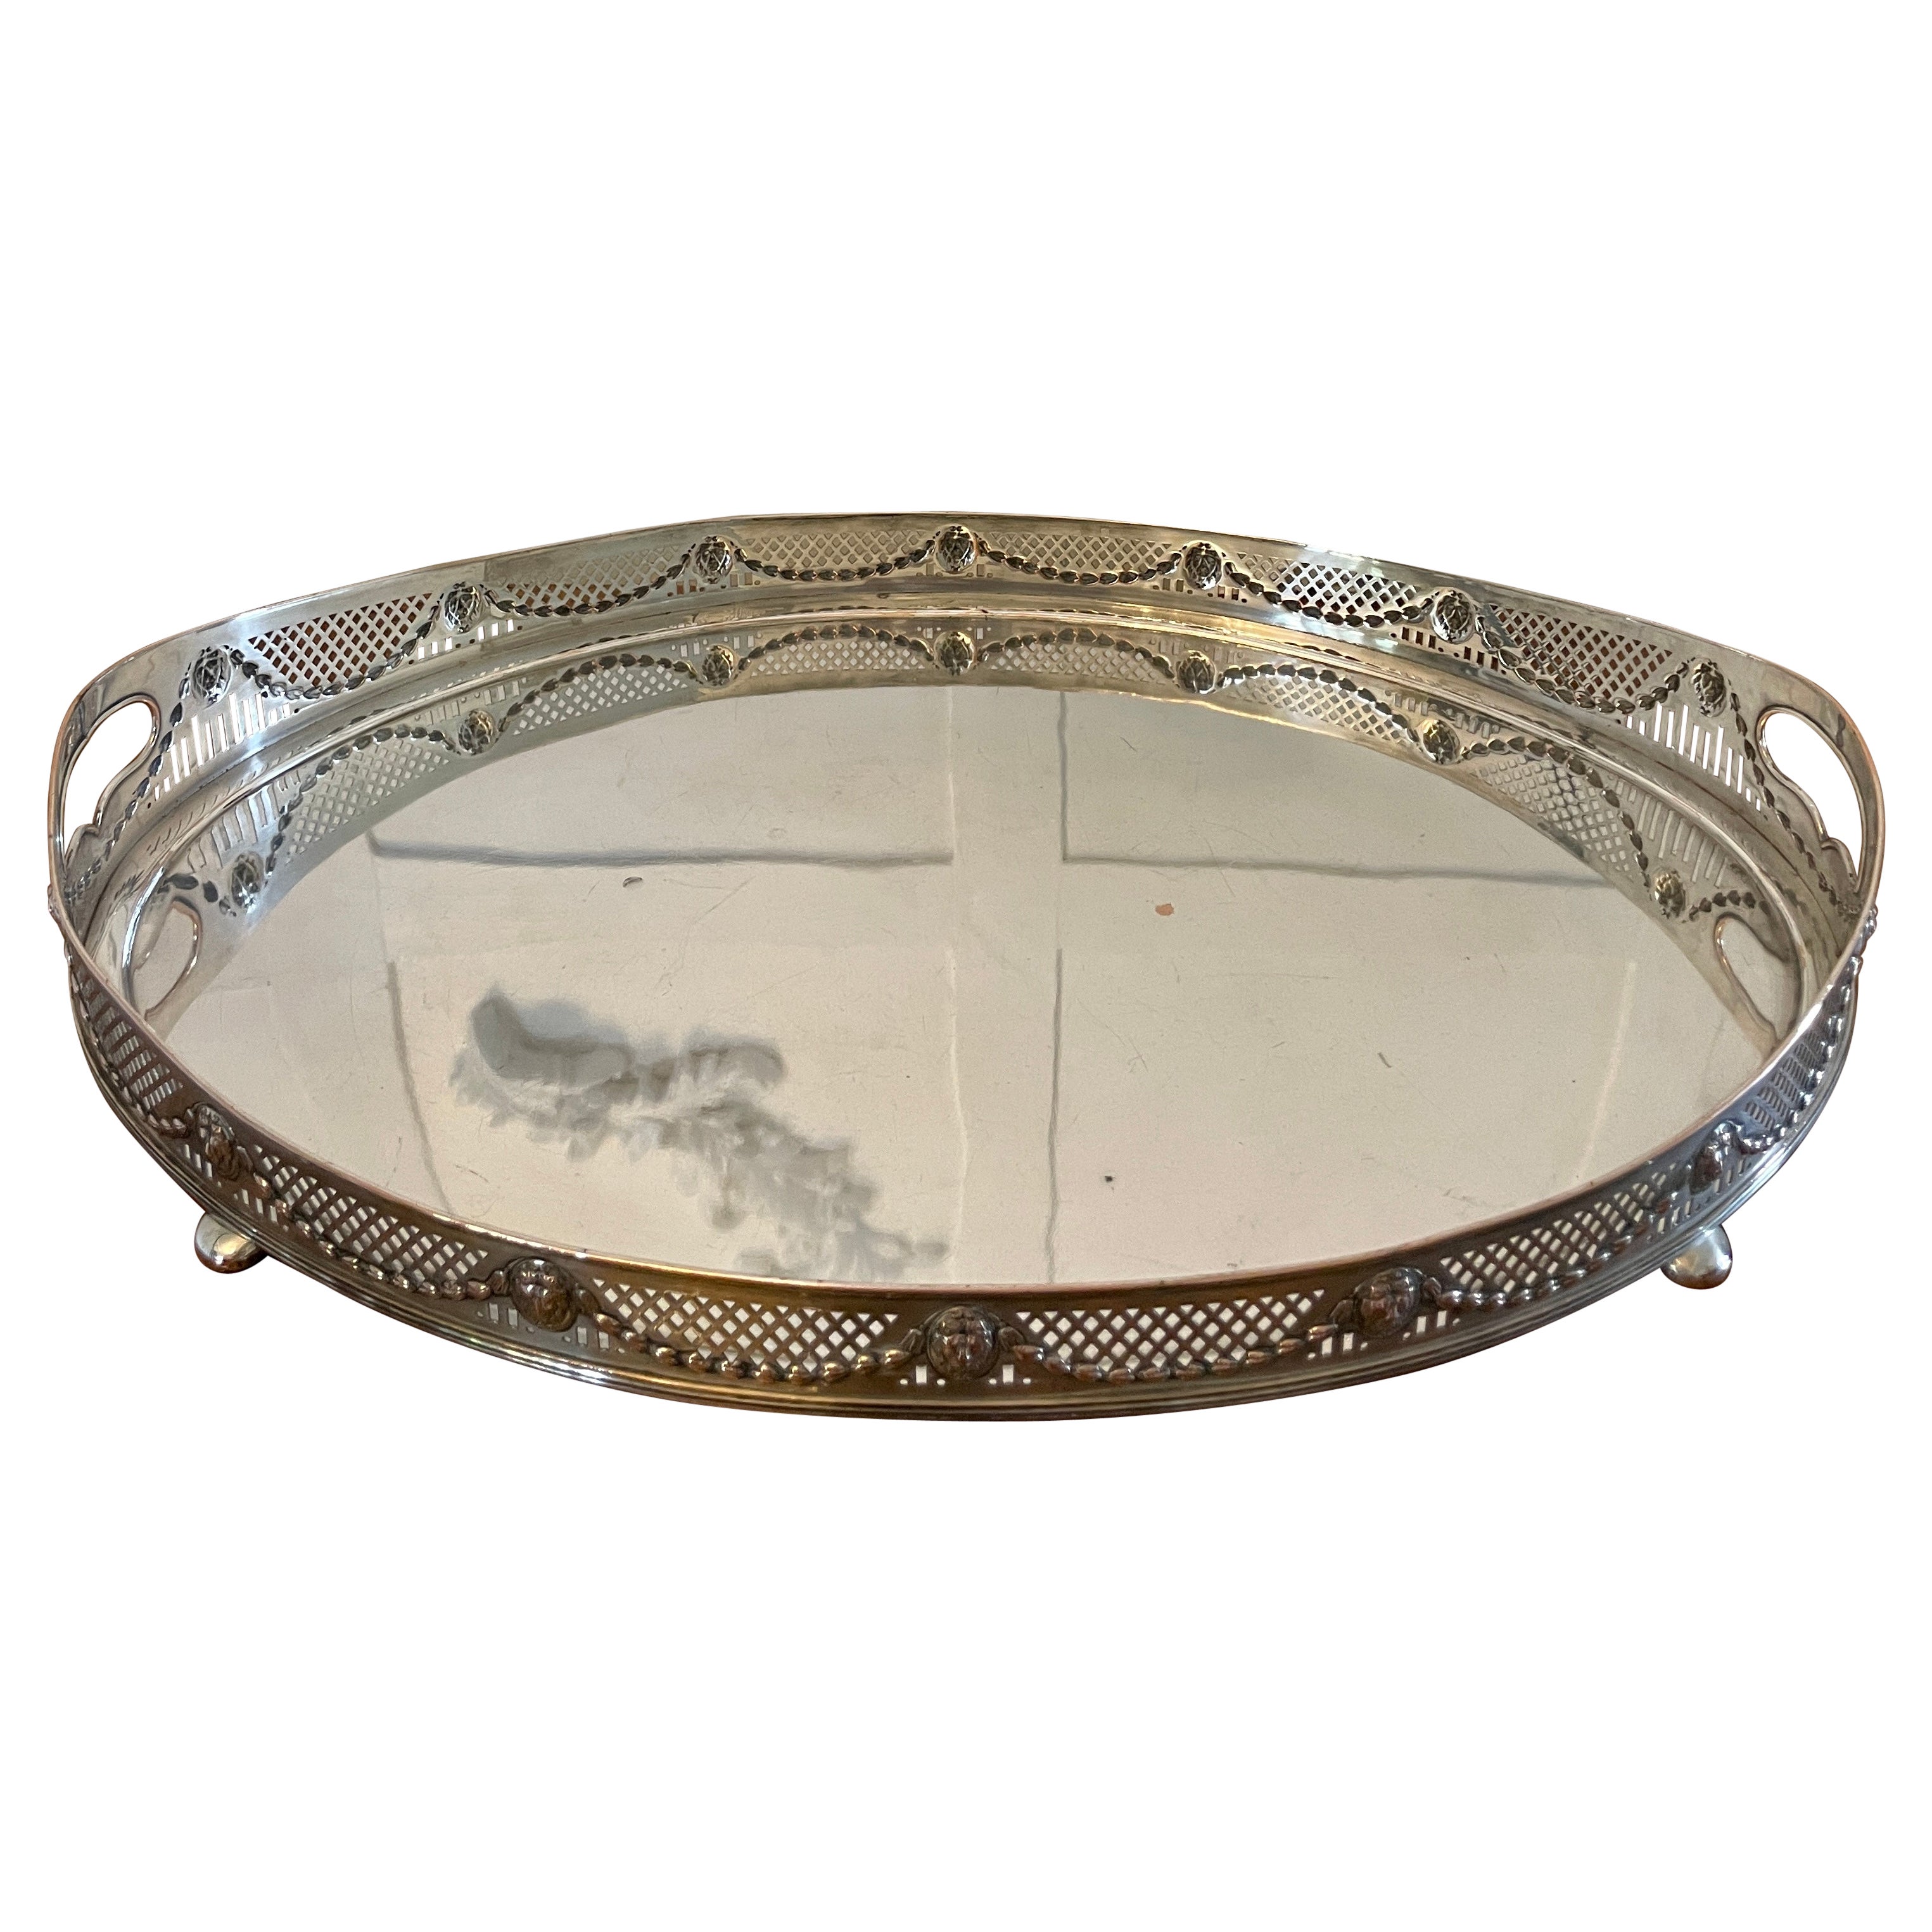  Large Antique Edwardian Quality Silver Plated Oval Shaped Tea Tray  For Sale